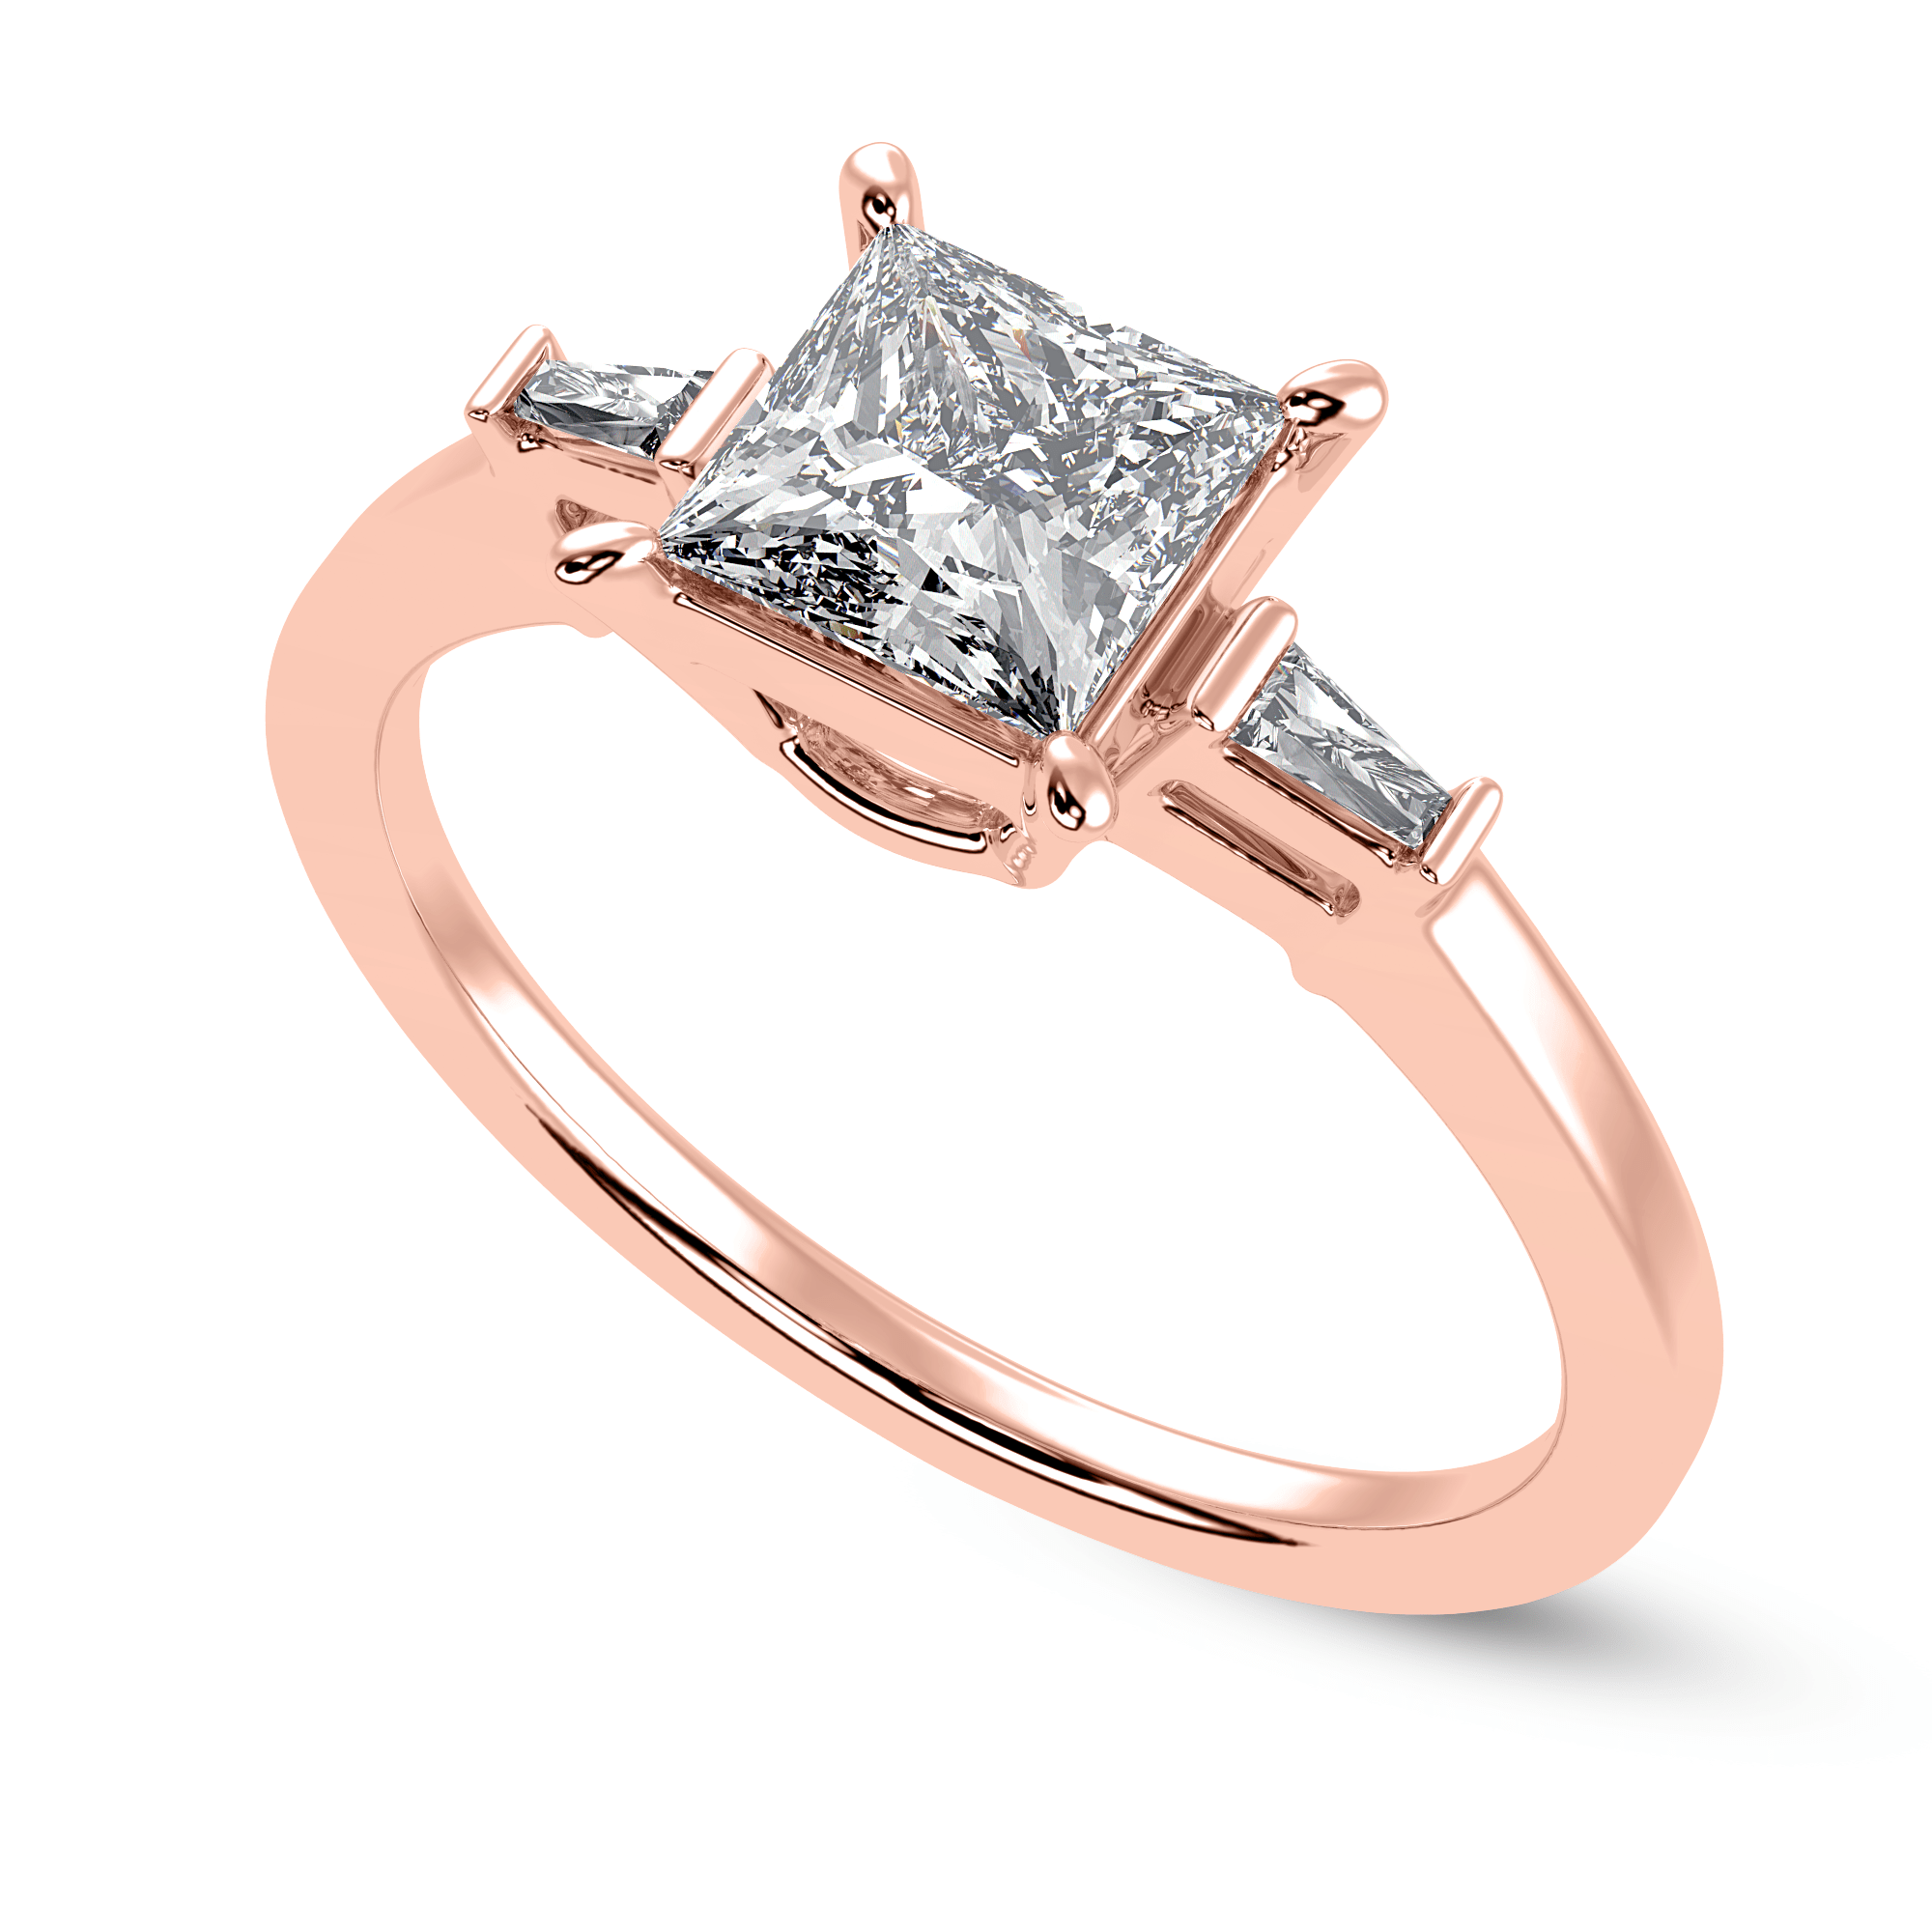 3 Carat Princess Cut Solitaire Diamond Ring — Ouros Jewels